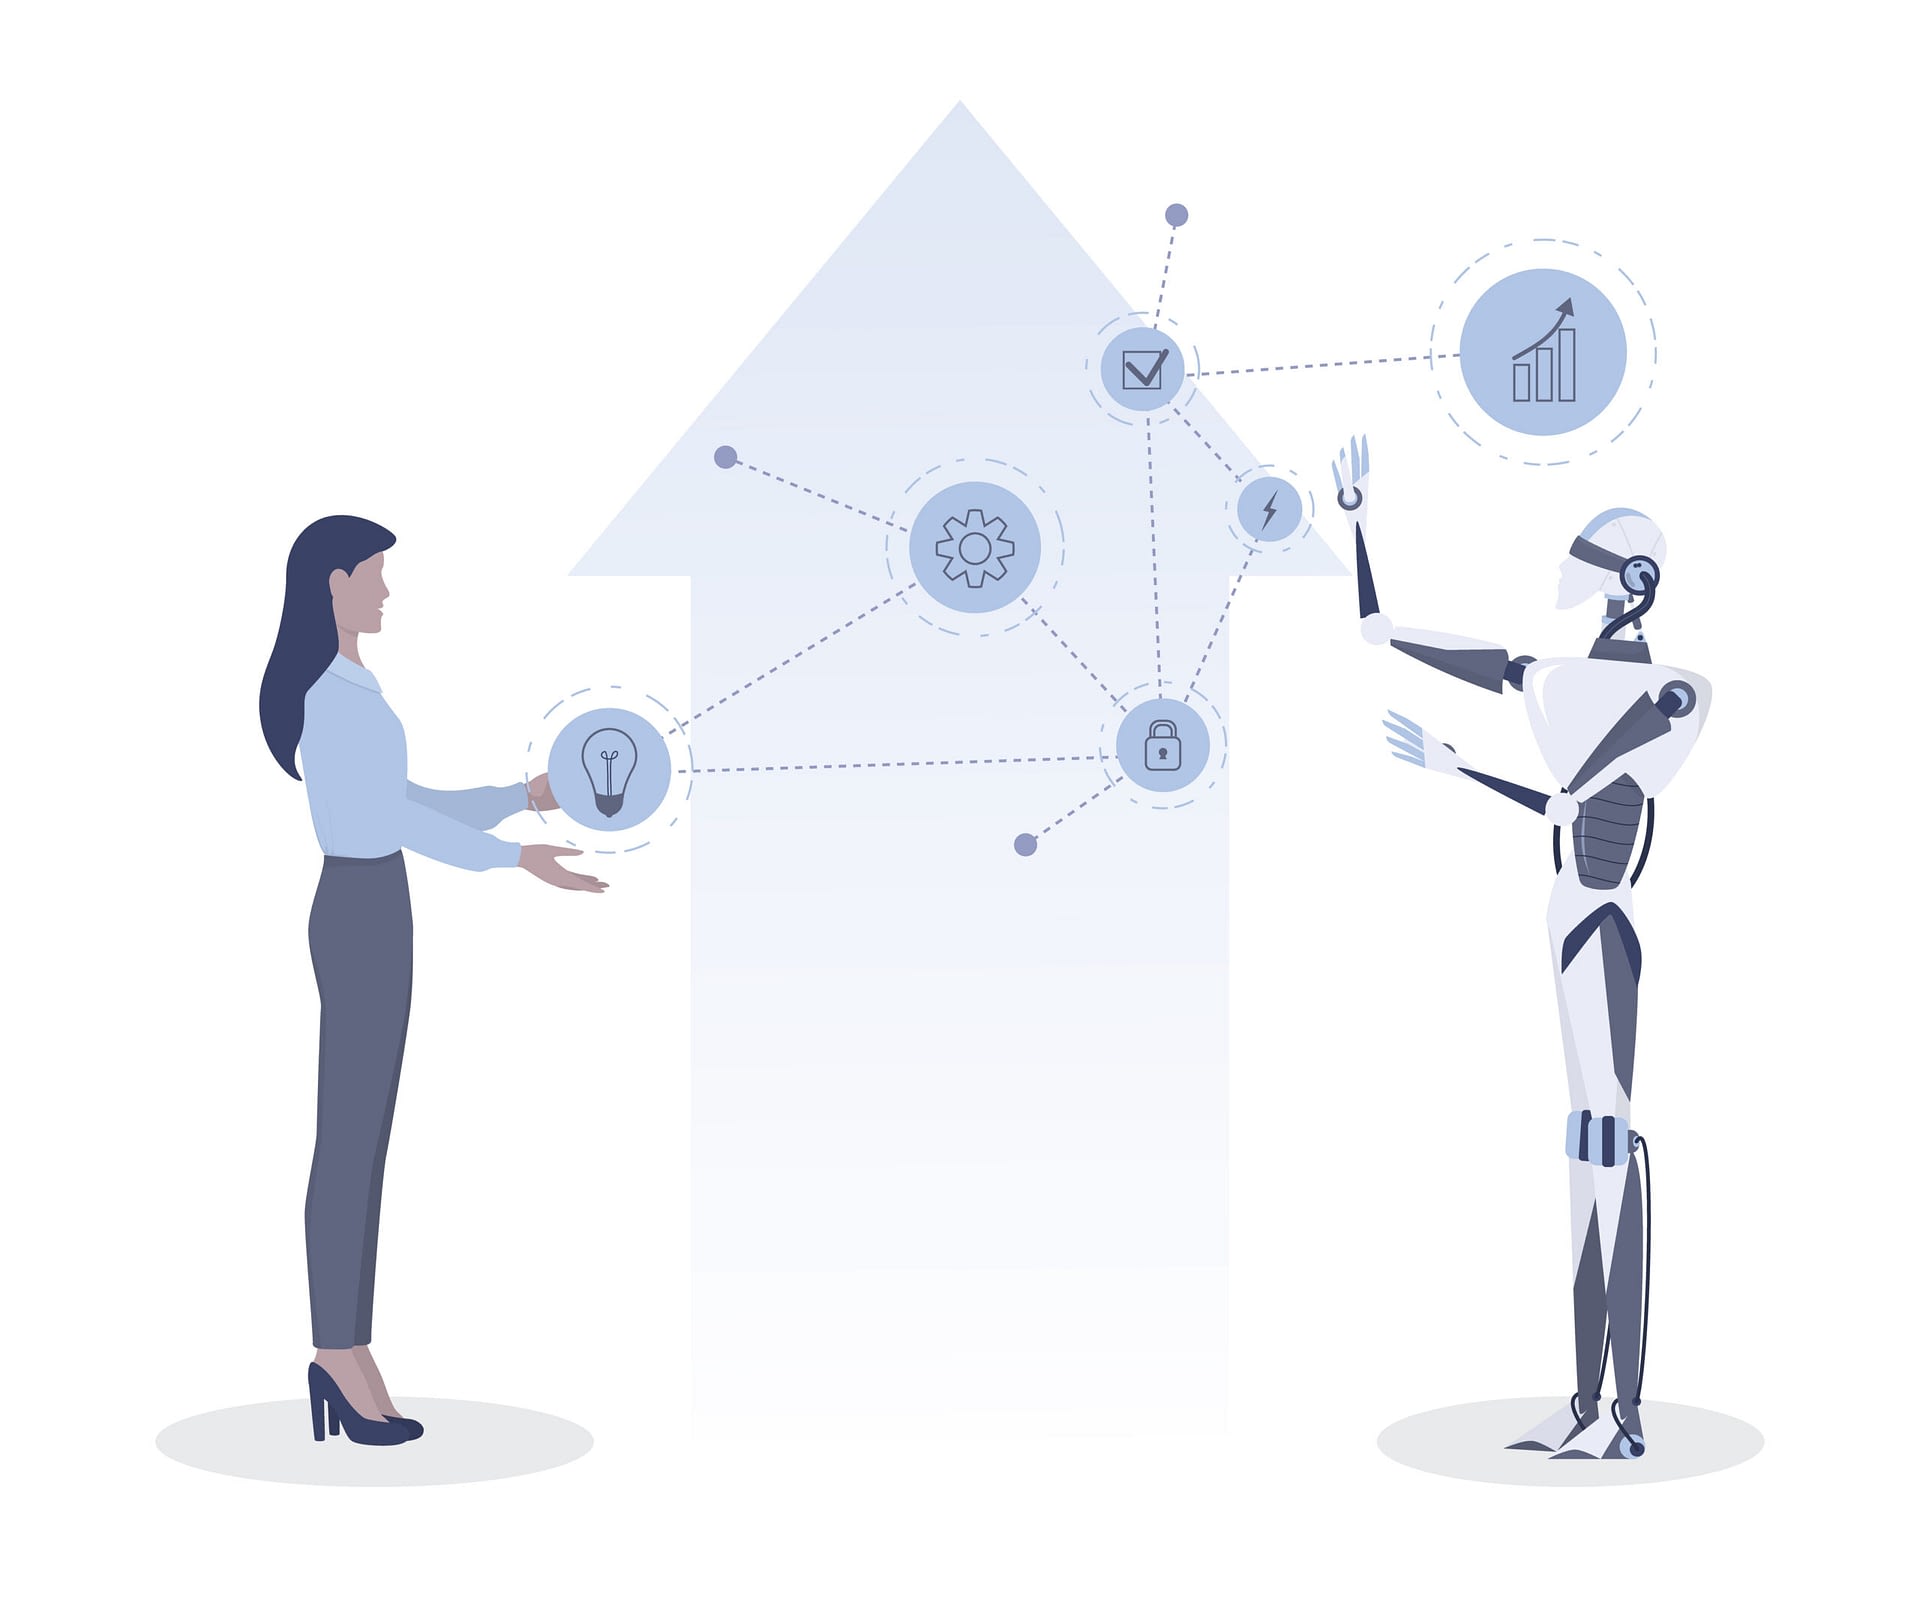 Businesswoman and robot communication idea. Human offer an idea and robot develop and translate it. Control and working together. Human and artificial intellect concept. Vector illustration